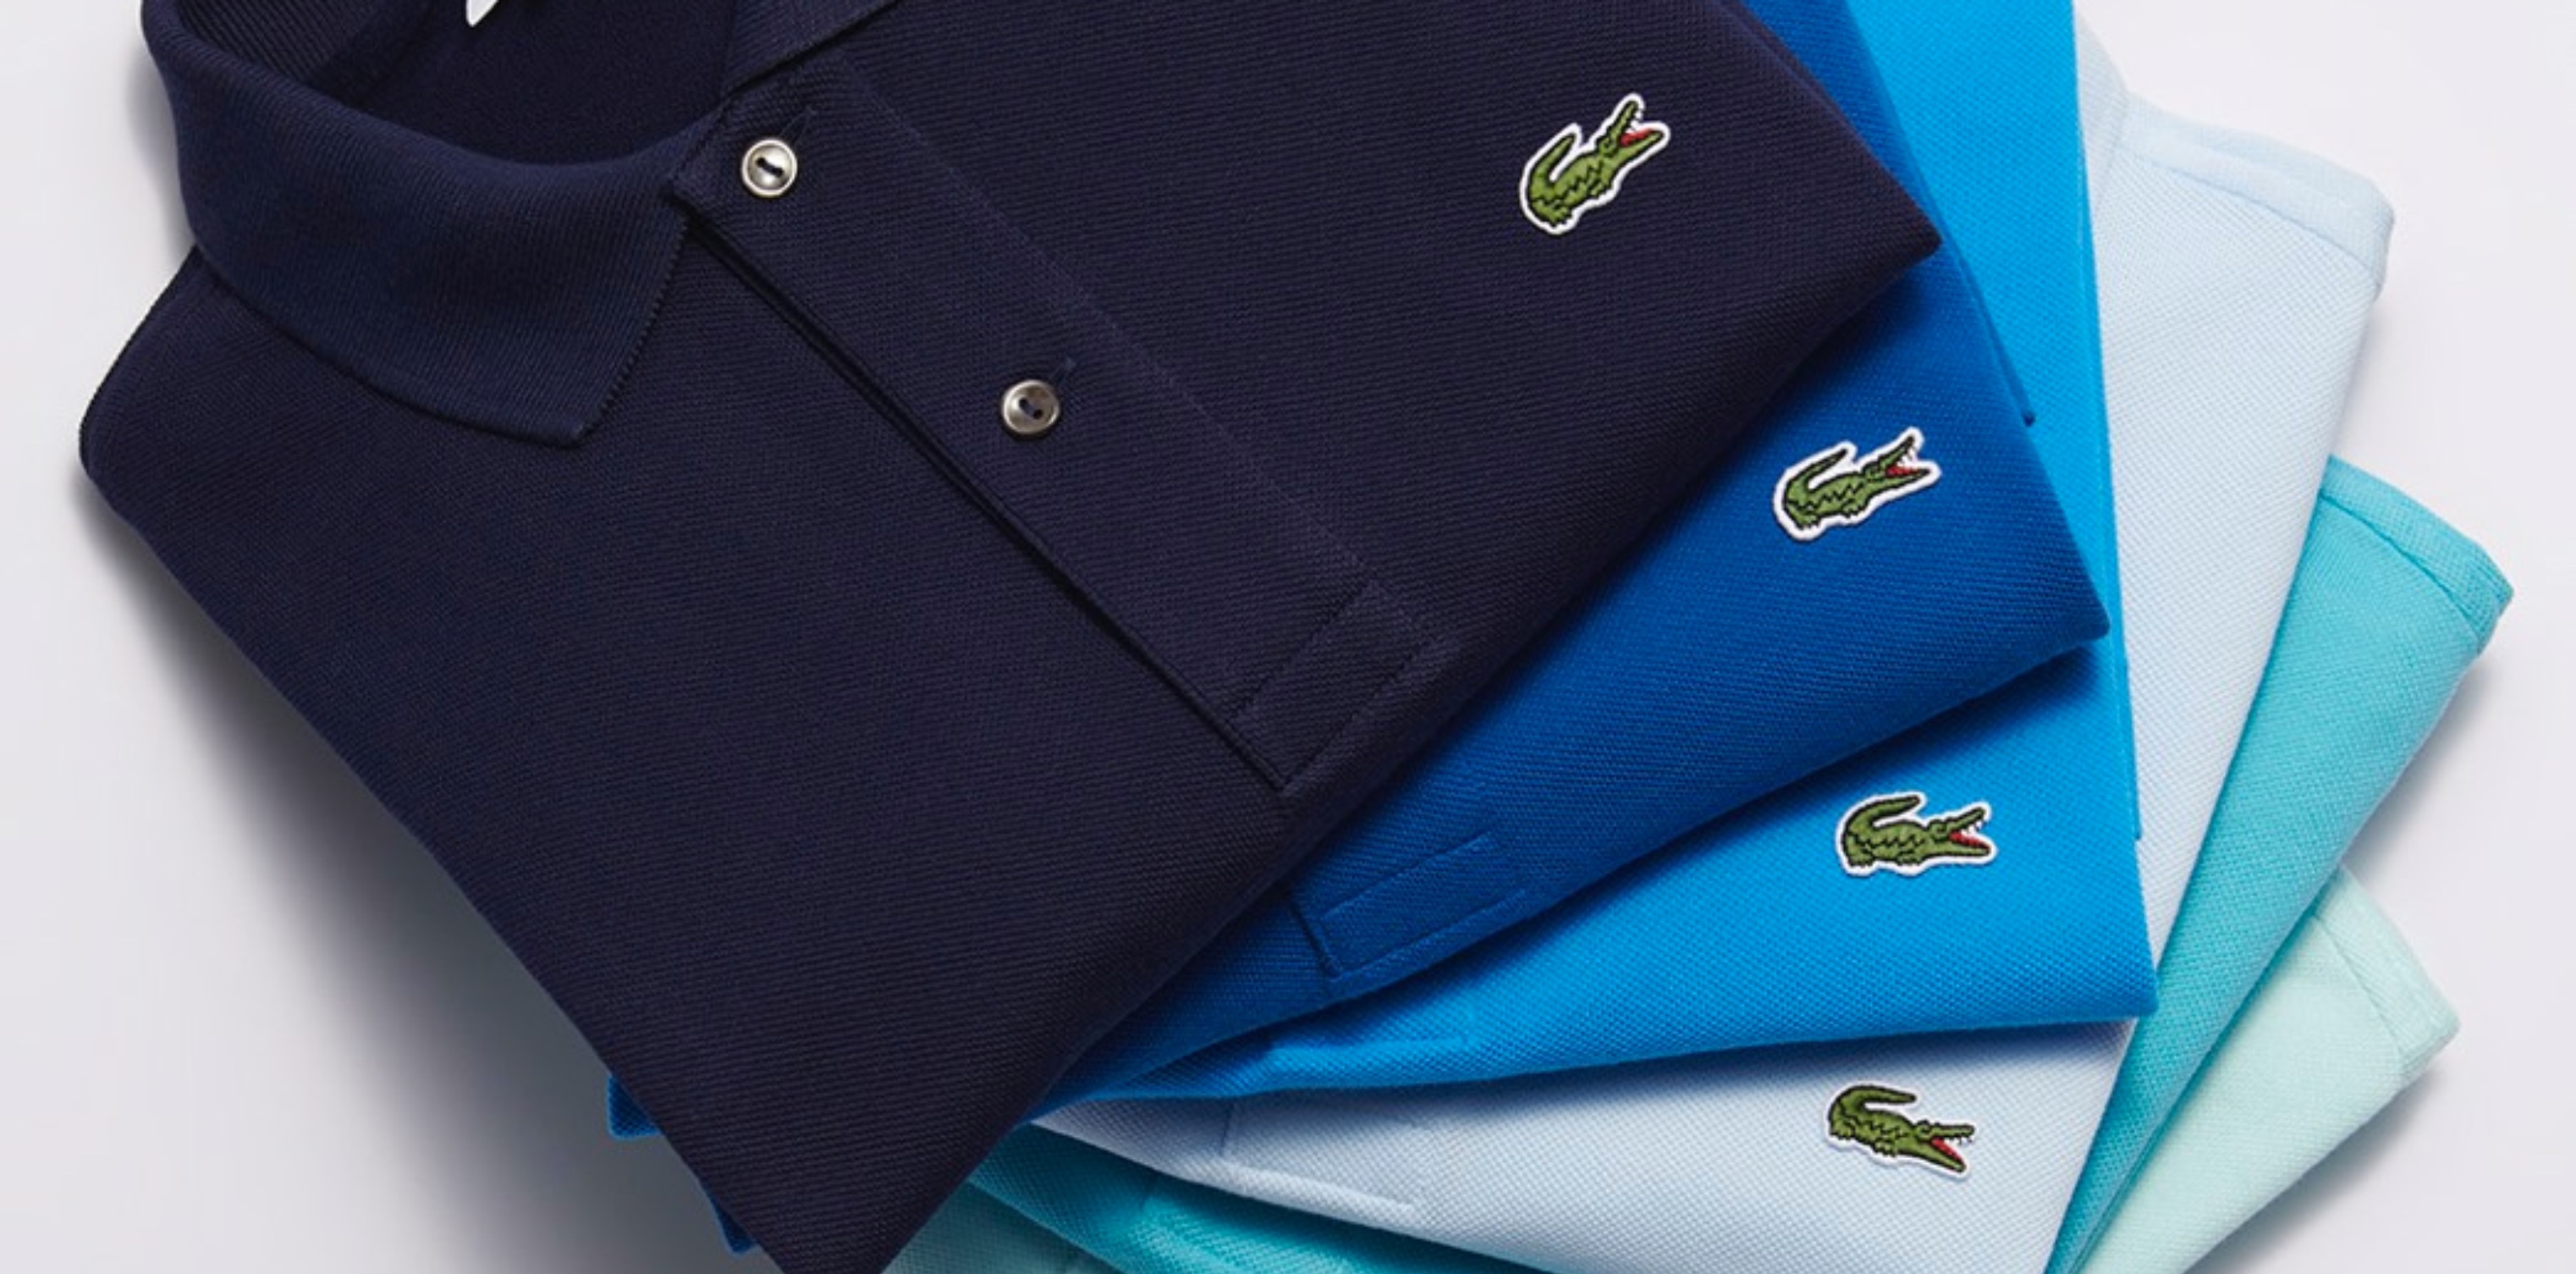 Lacoste Holiday Flash up 50% off favorites including polos, more